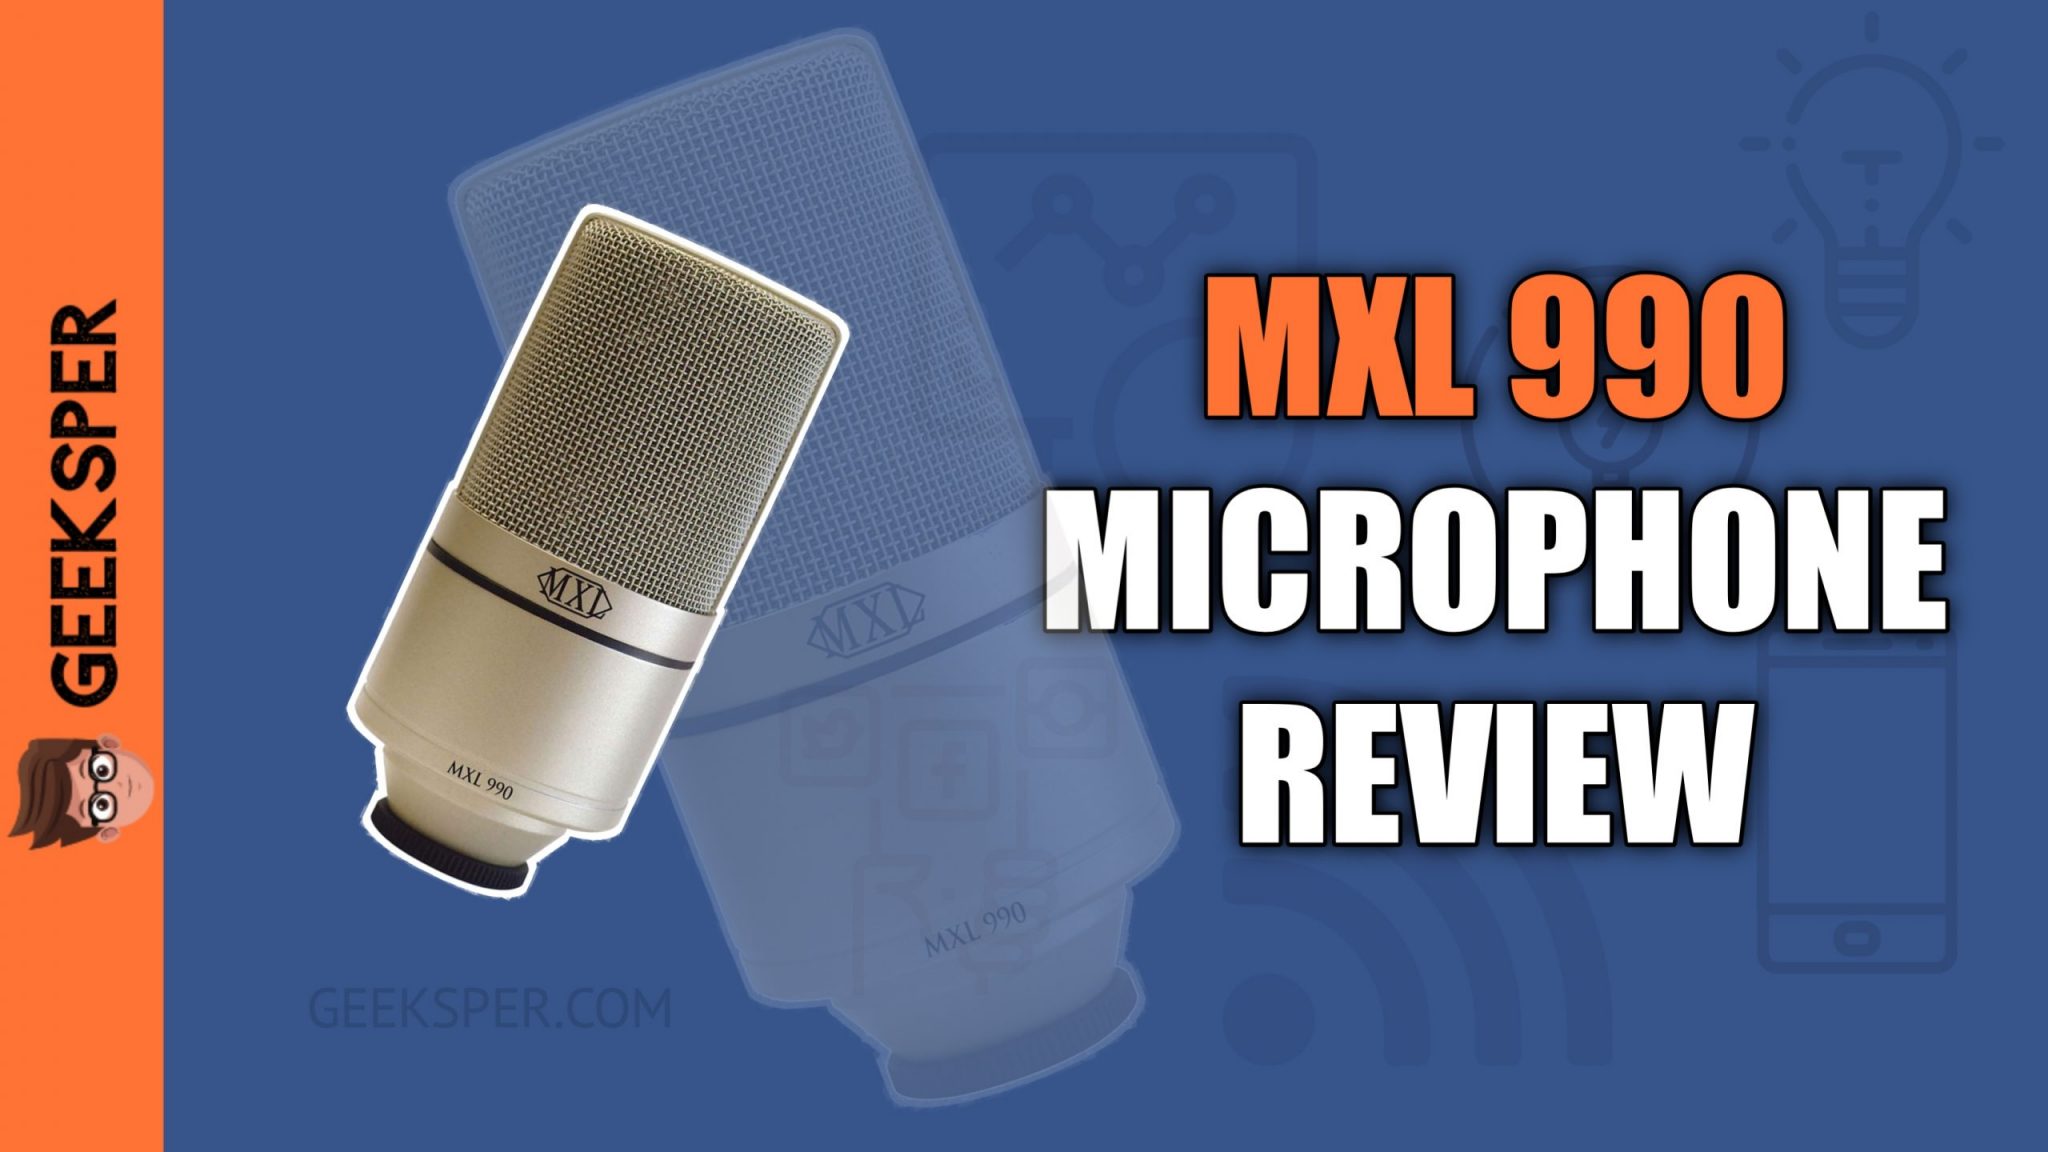 MXL 990 Review: Microphone Features, Performance, Pros & Cons